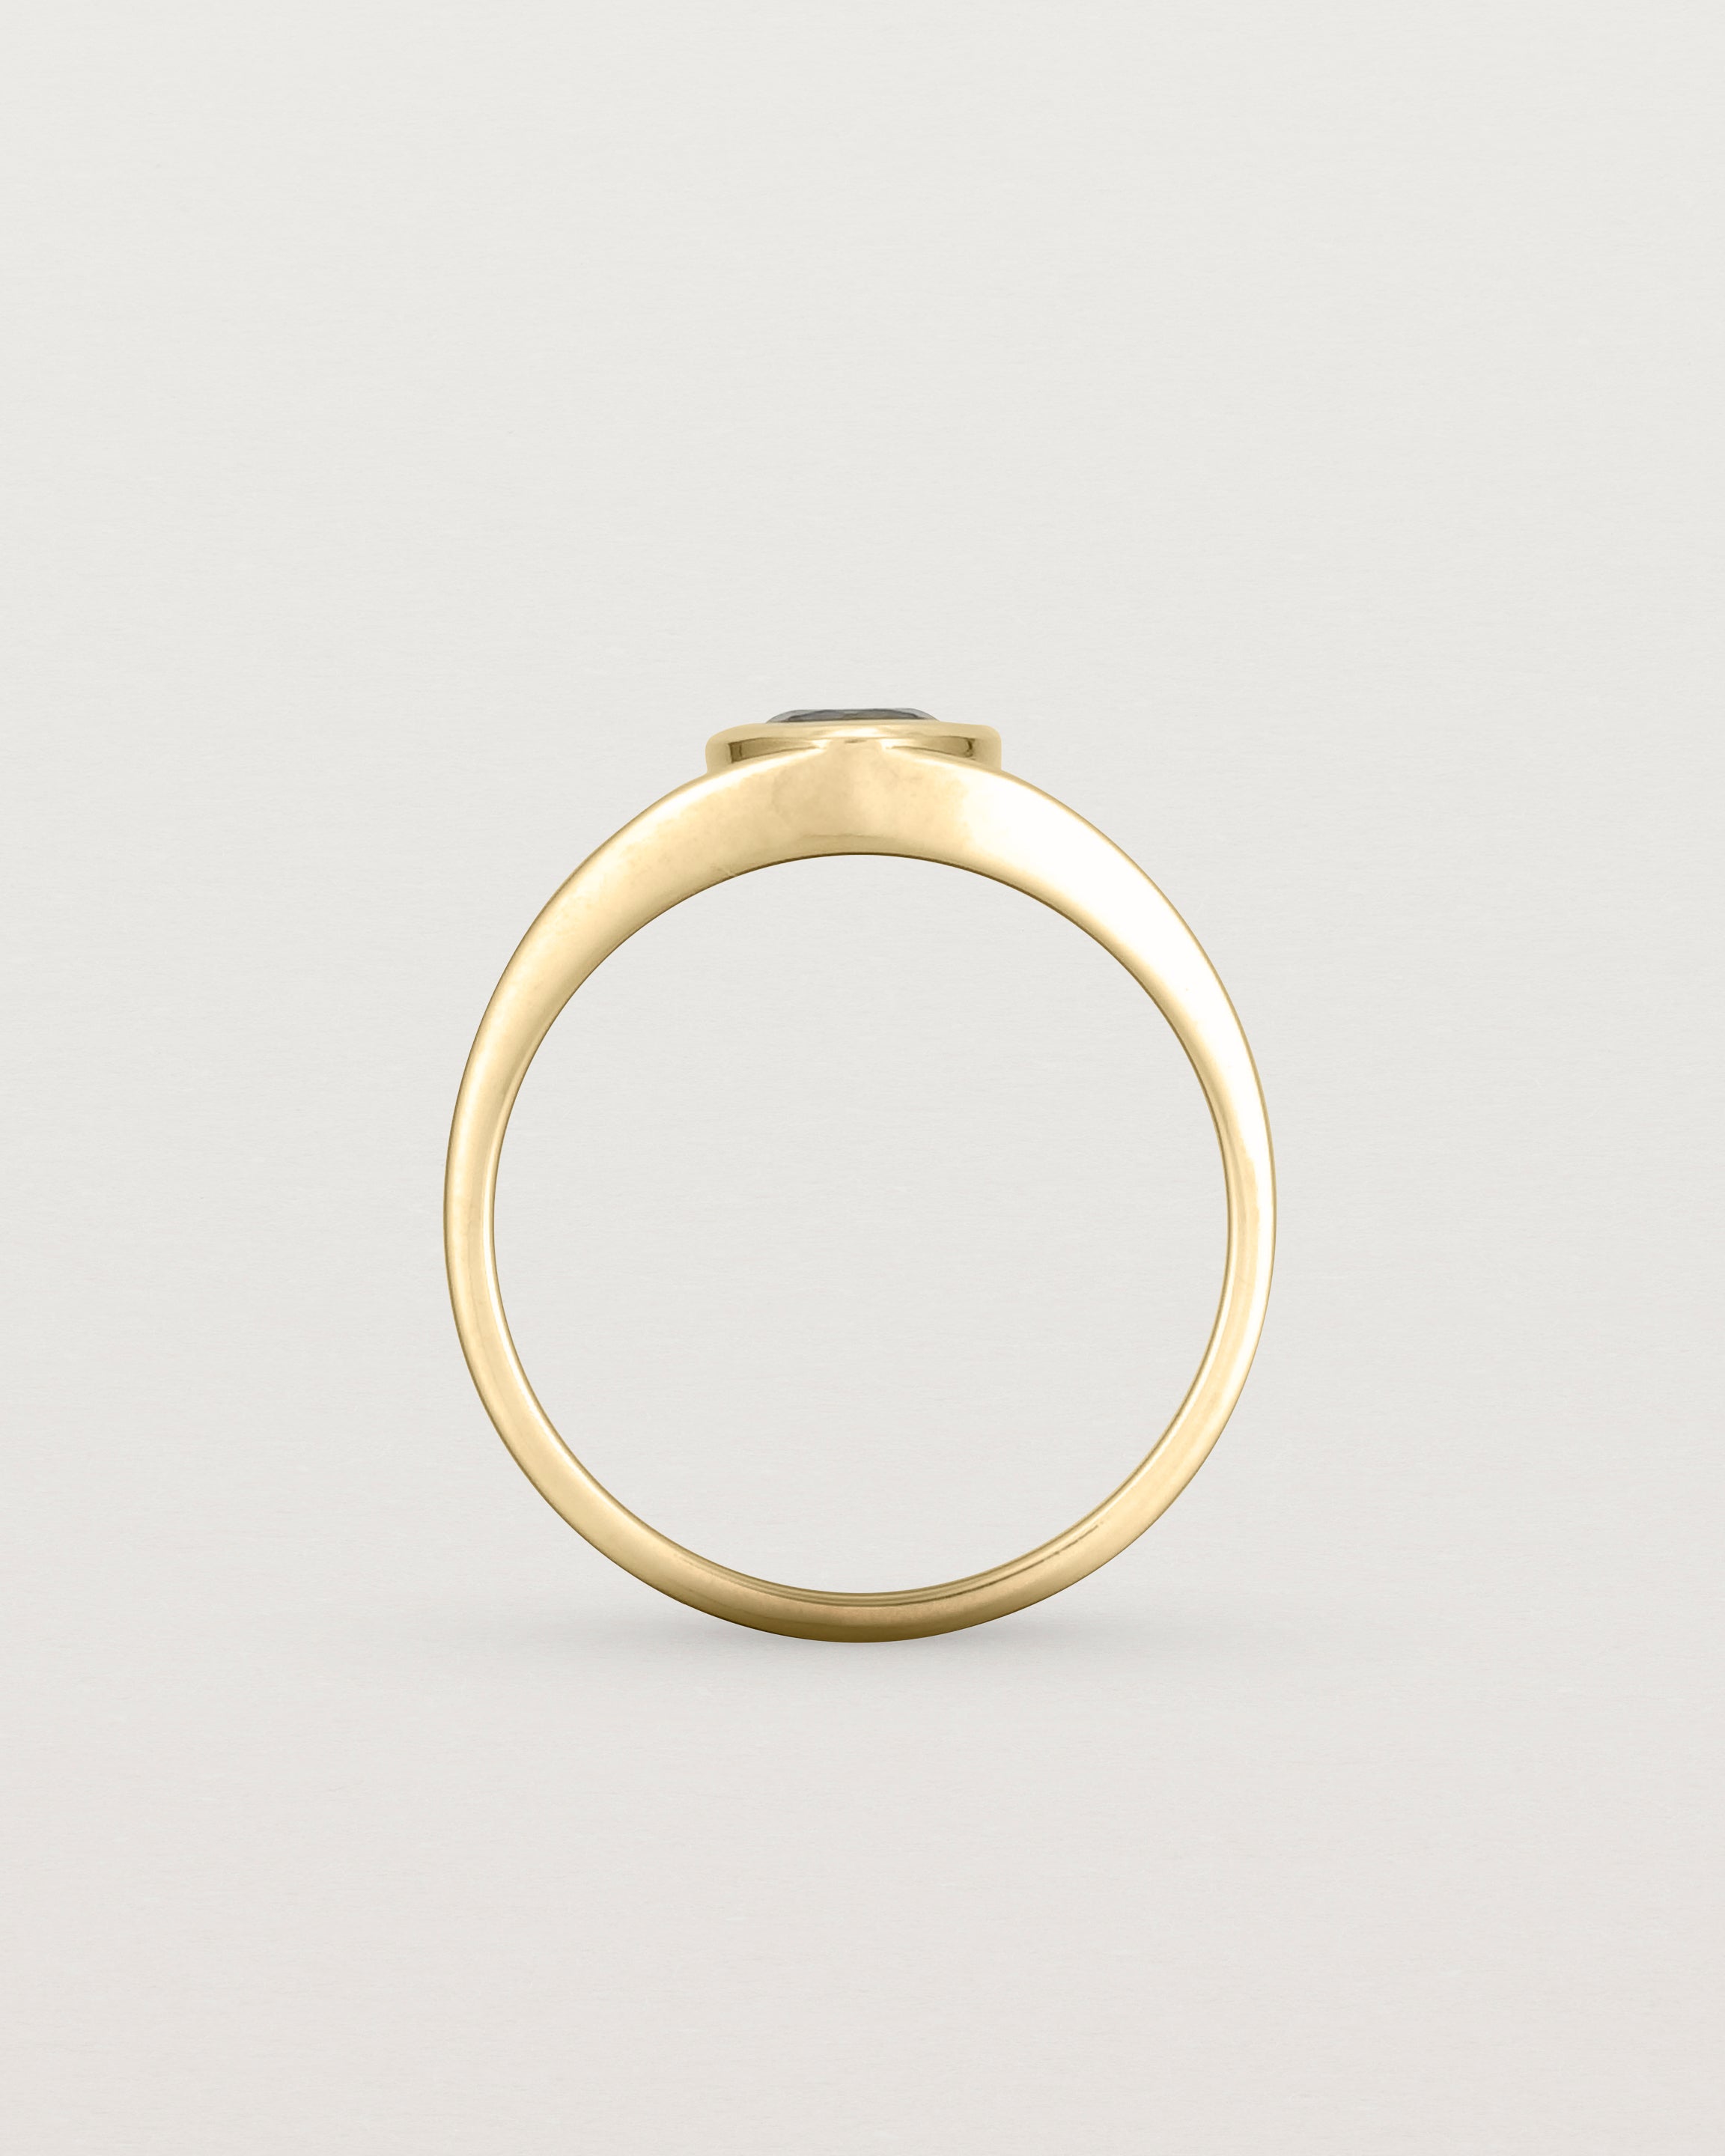 Standing view of the Amos Ring | Australian Sapphire in Yellow Gold.